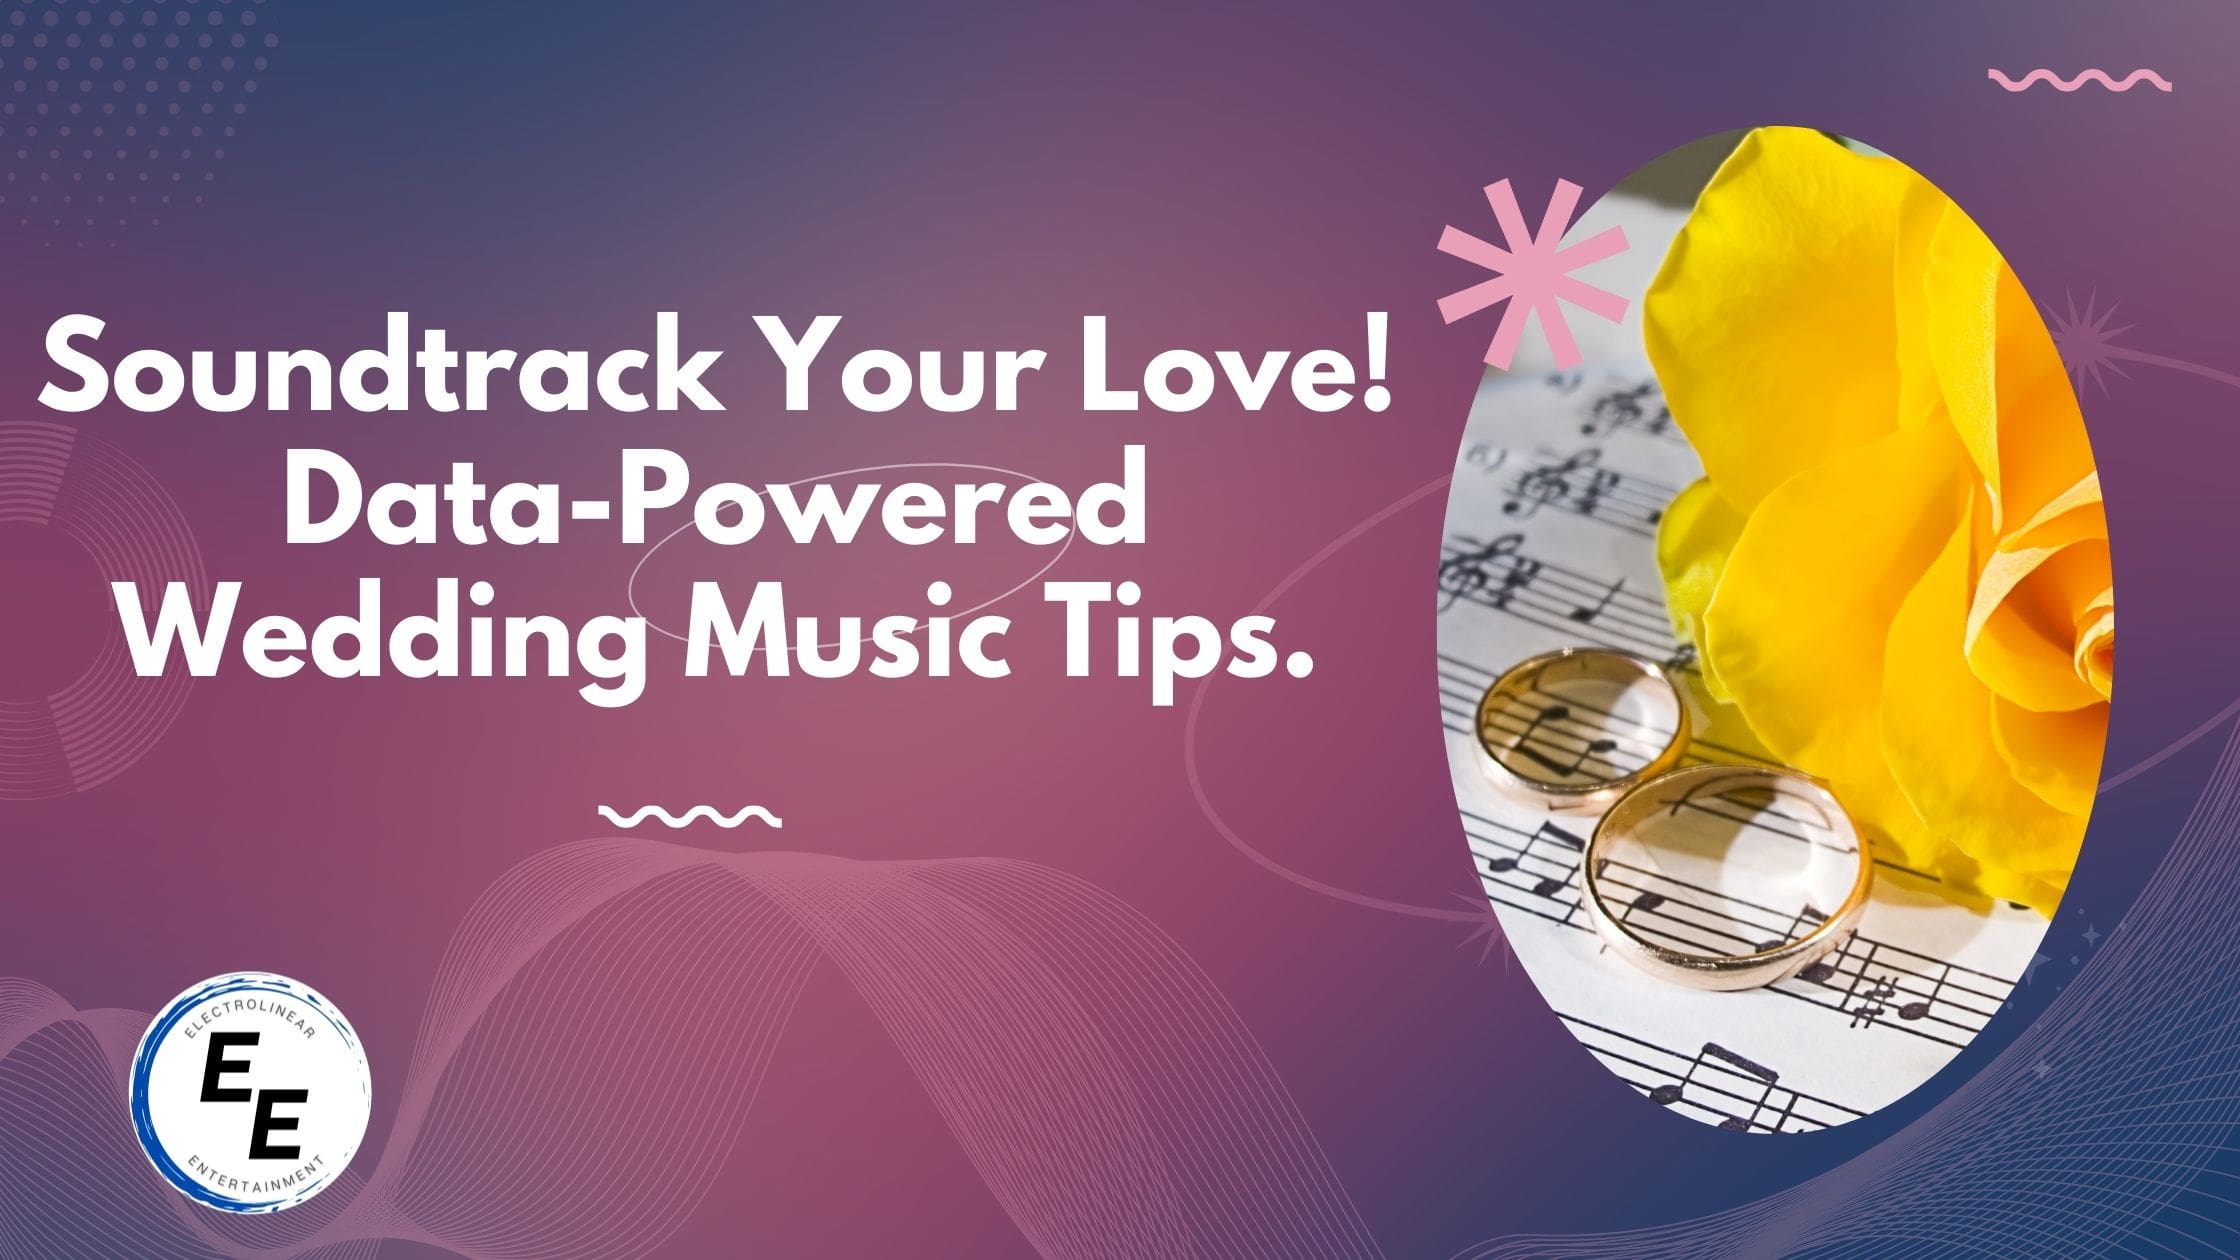 Wedding Music Mix: Data & Soul for Your Big Day